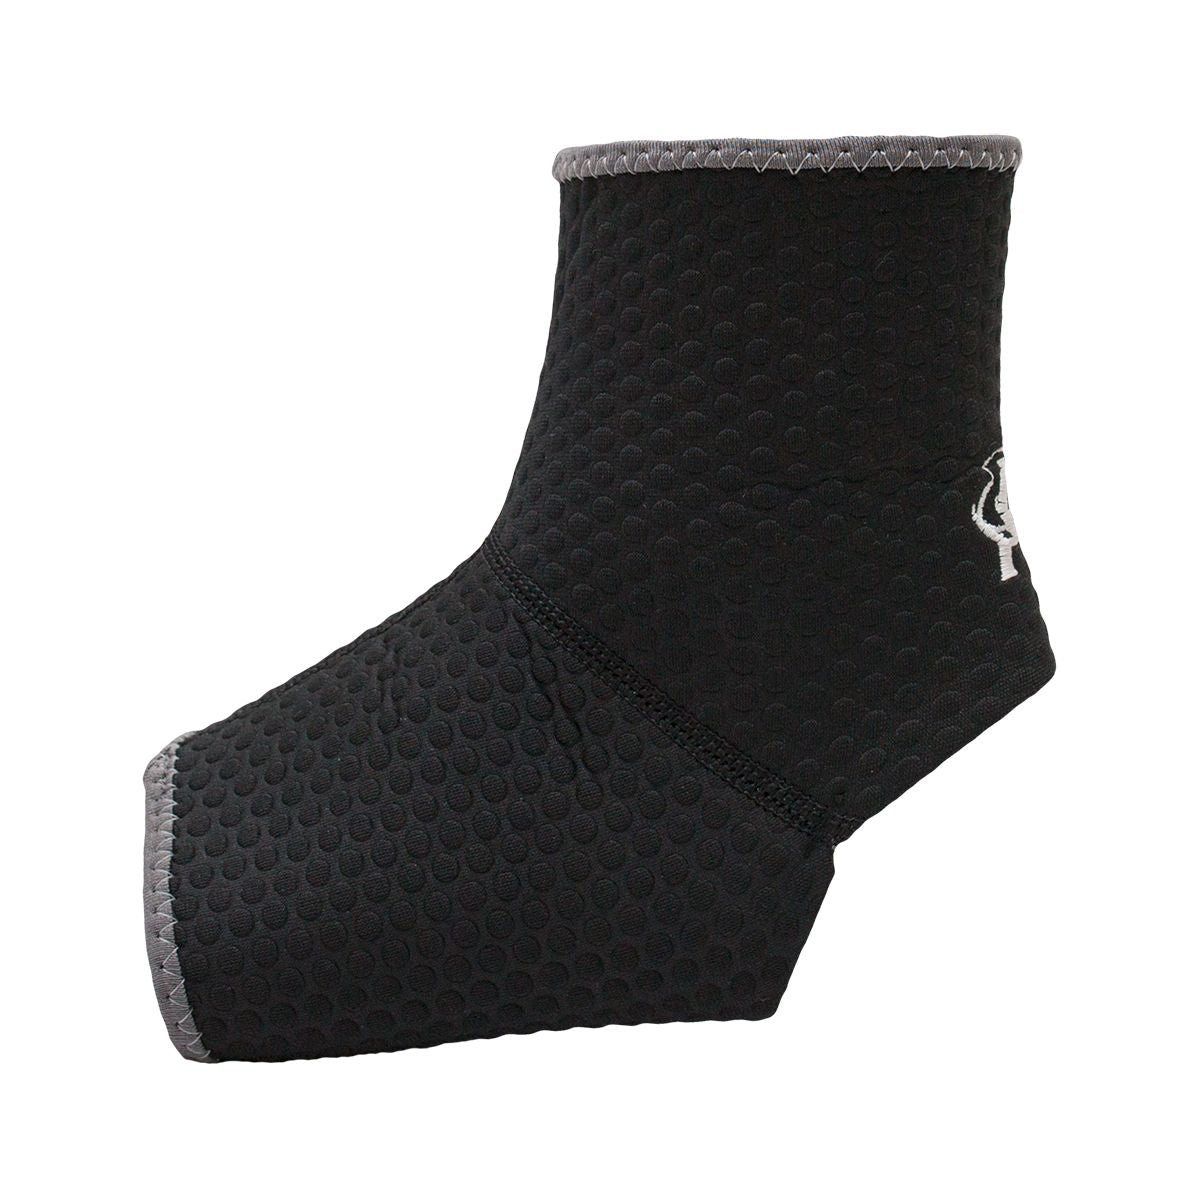 ANKLE SLEEVE COMPRESSION SUPPORT RUGBY ANKLE SUPPORT MMA KICK BOXING